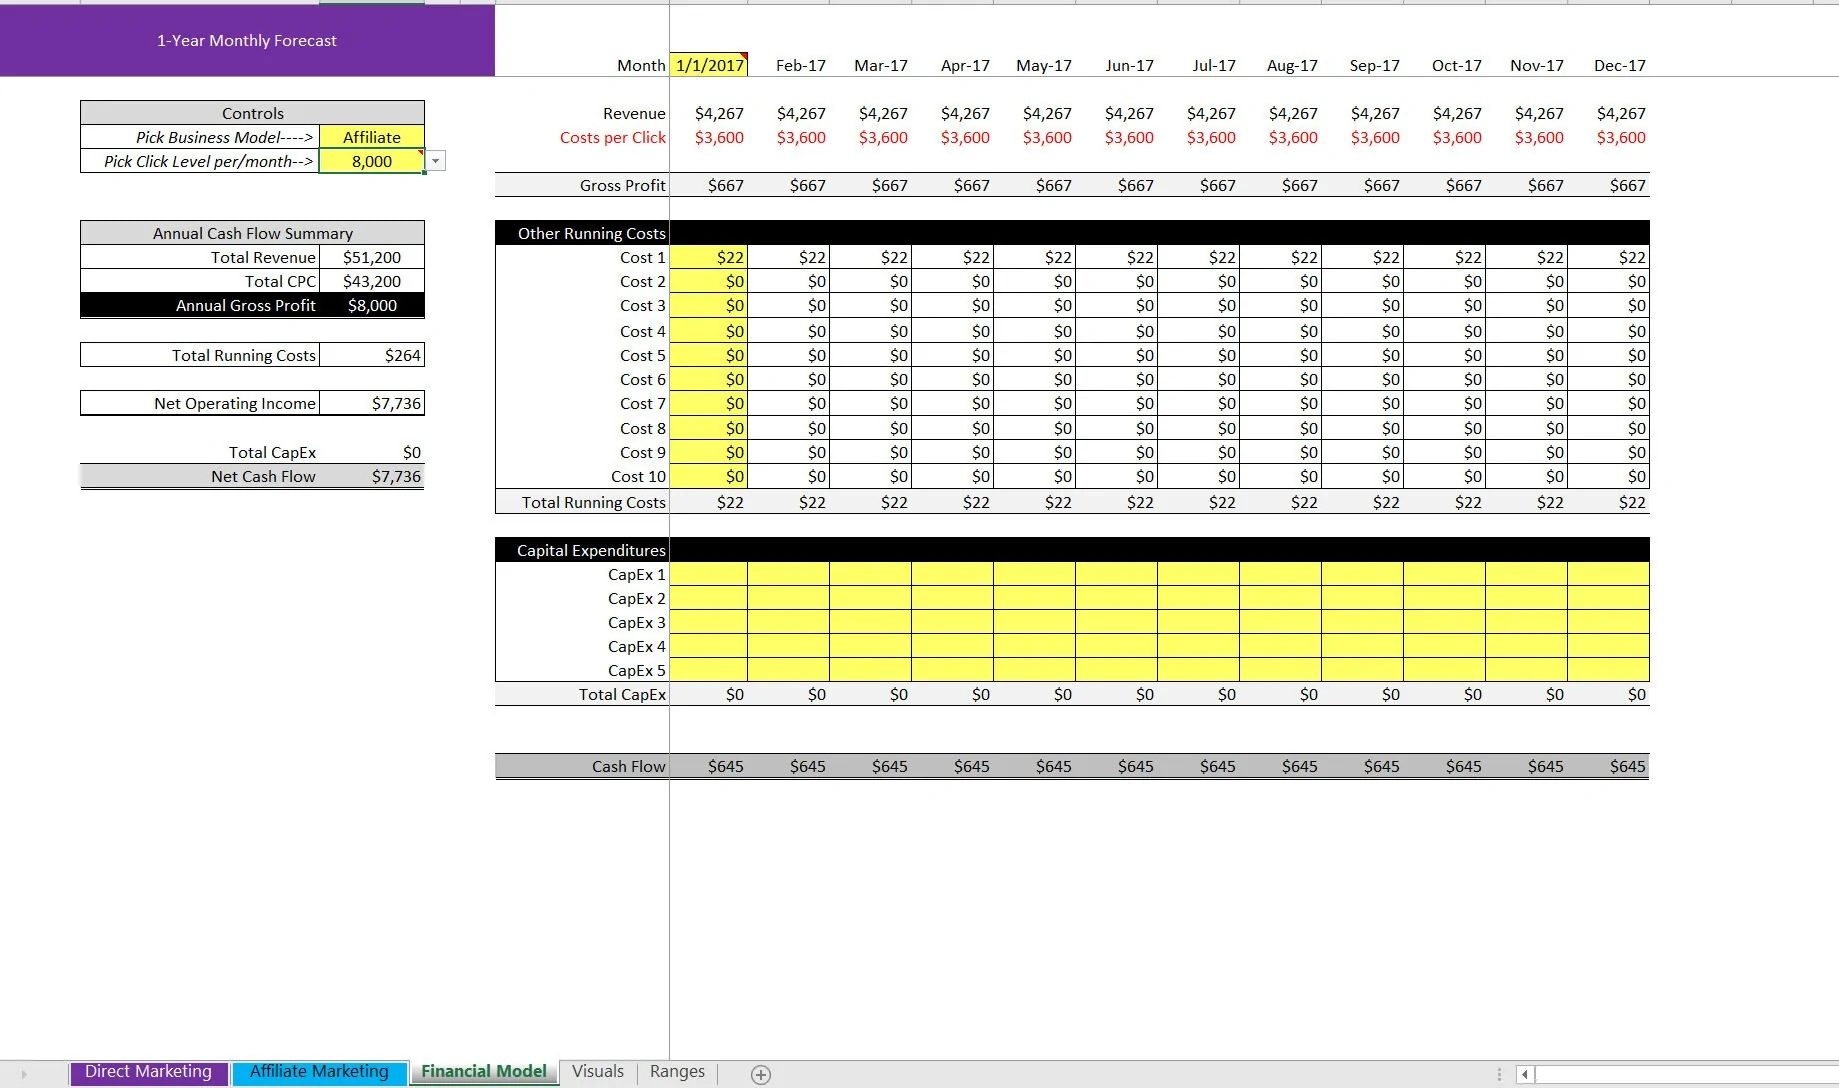 This is a partial preview of PPC Advertising Financial Calculator & Sensitivity Analysis (Excel workbook (XLSX)). 